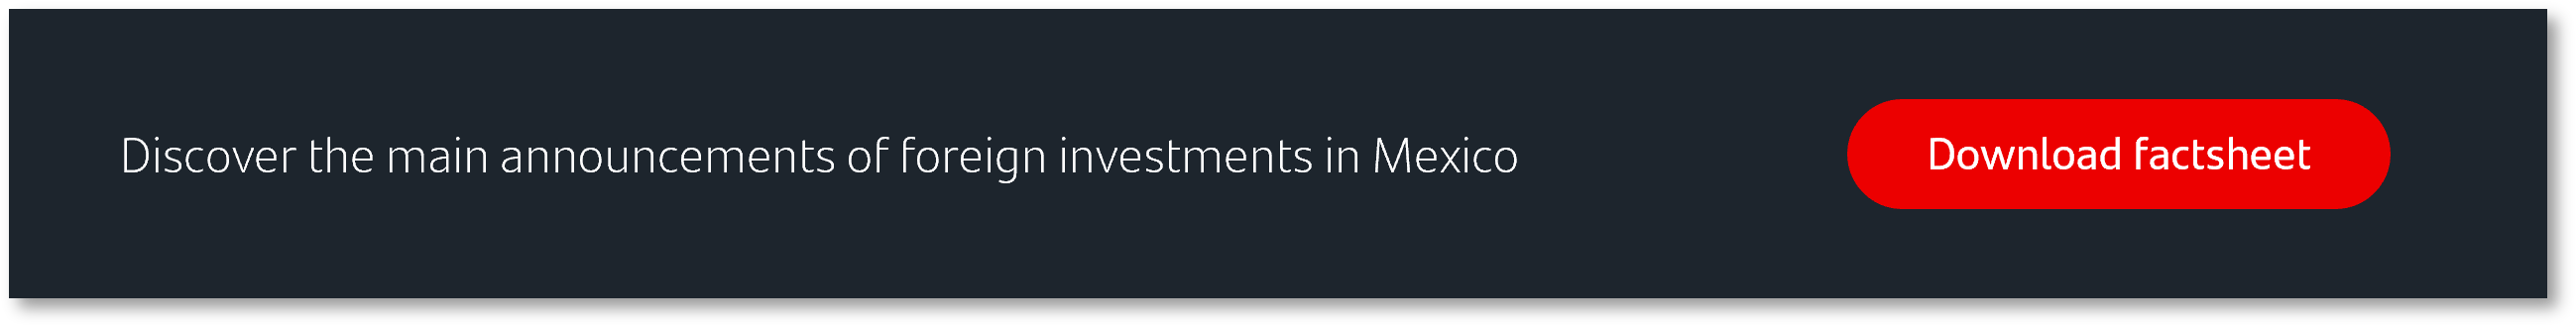 Discover the main announcements of foreign investments in Mexico - Nearshoring